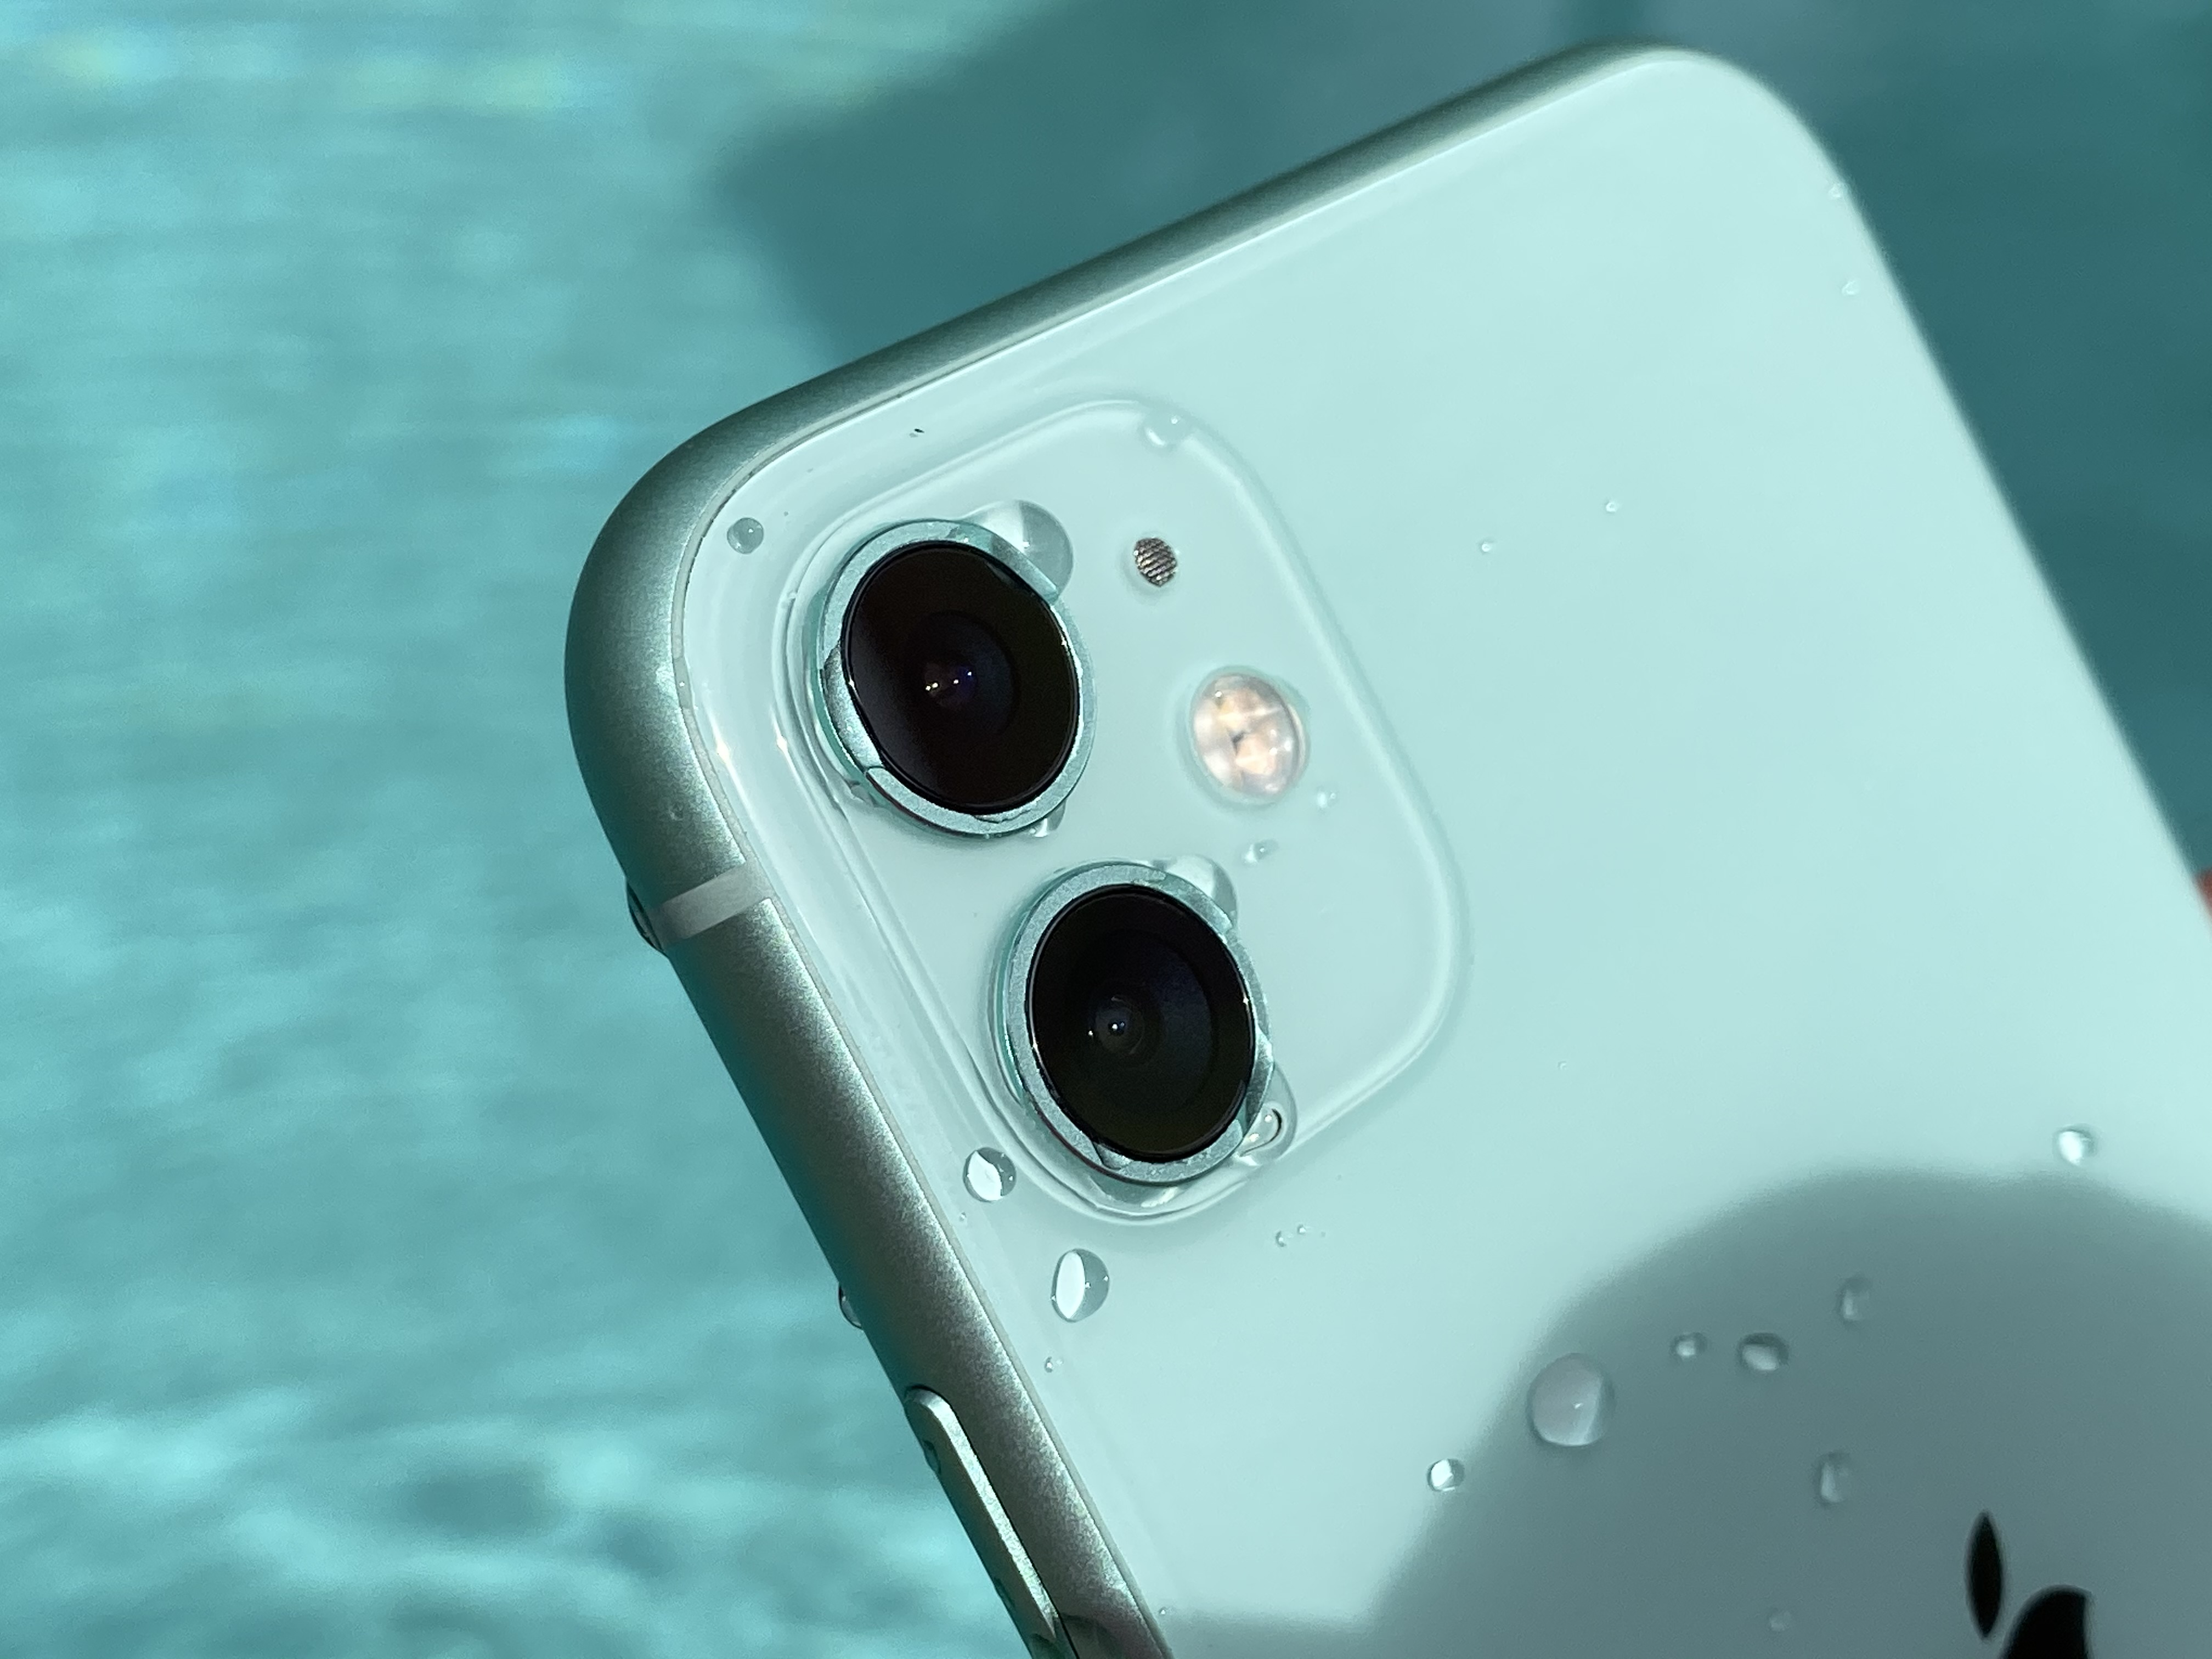 iPhone 11 stayed at the bottom of a lake for a week - and it still works